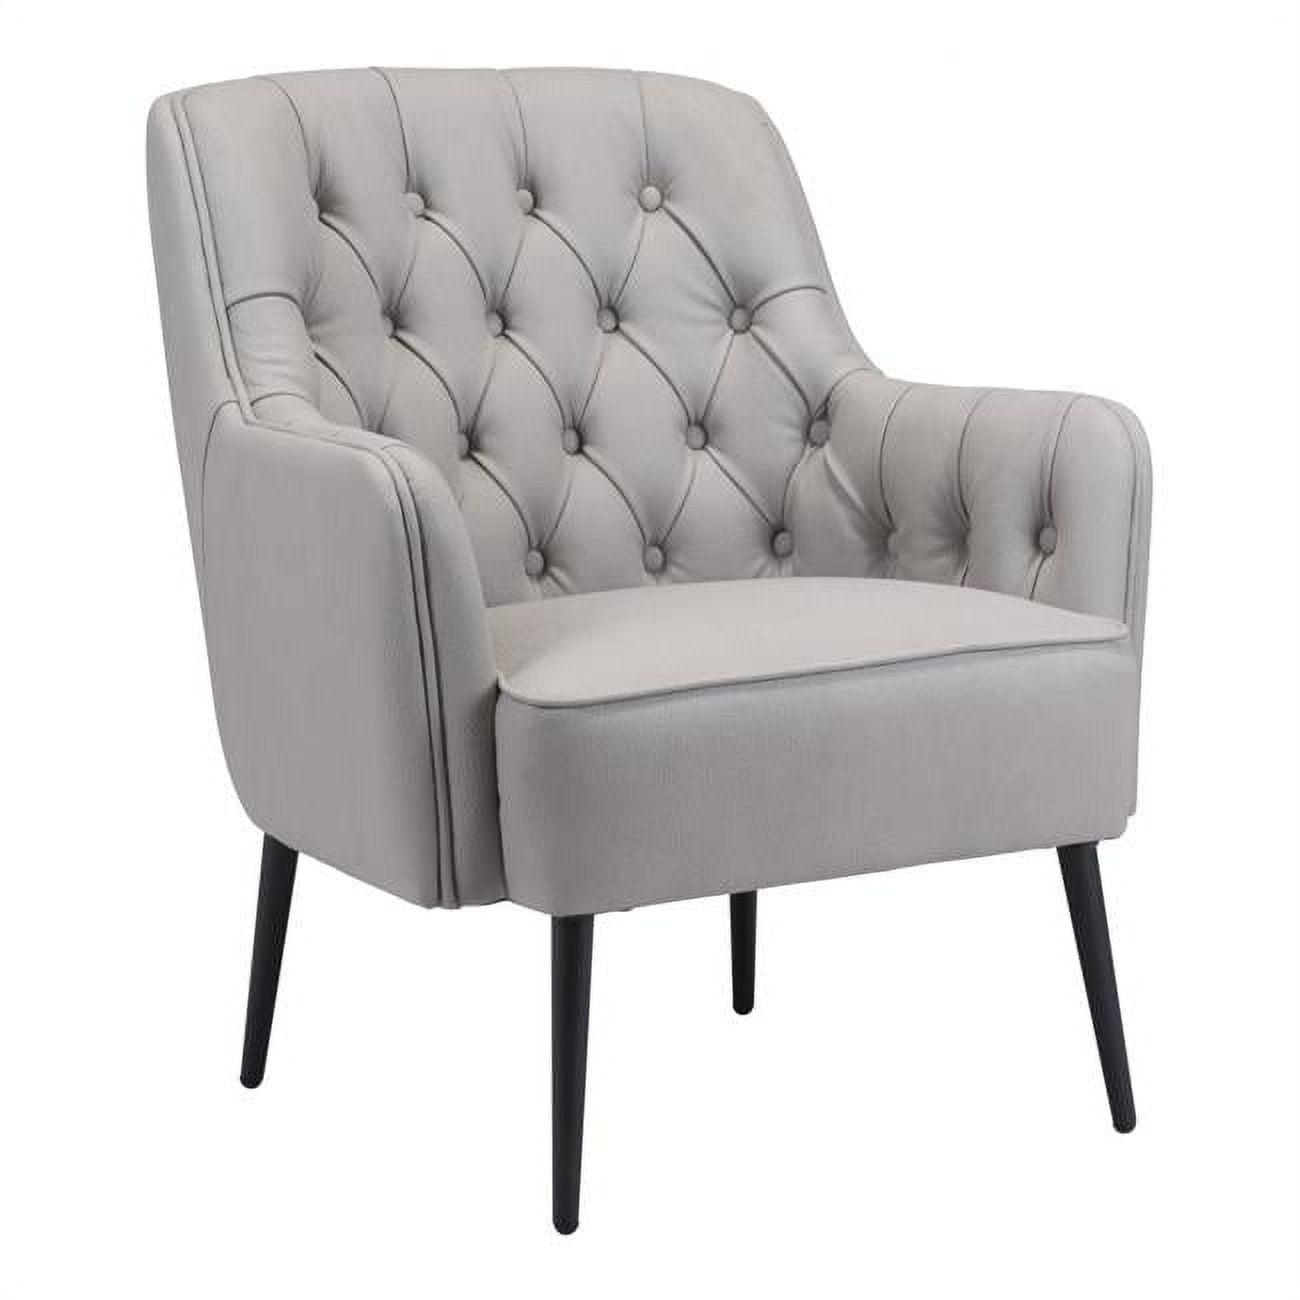 Contemporary Gray Faux Leather Arm Chair with Tufted Detail